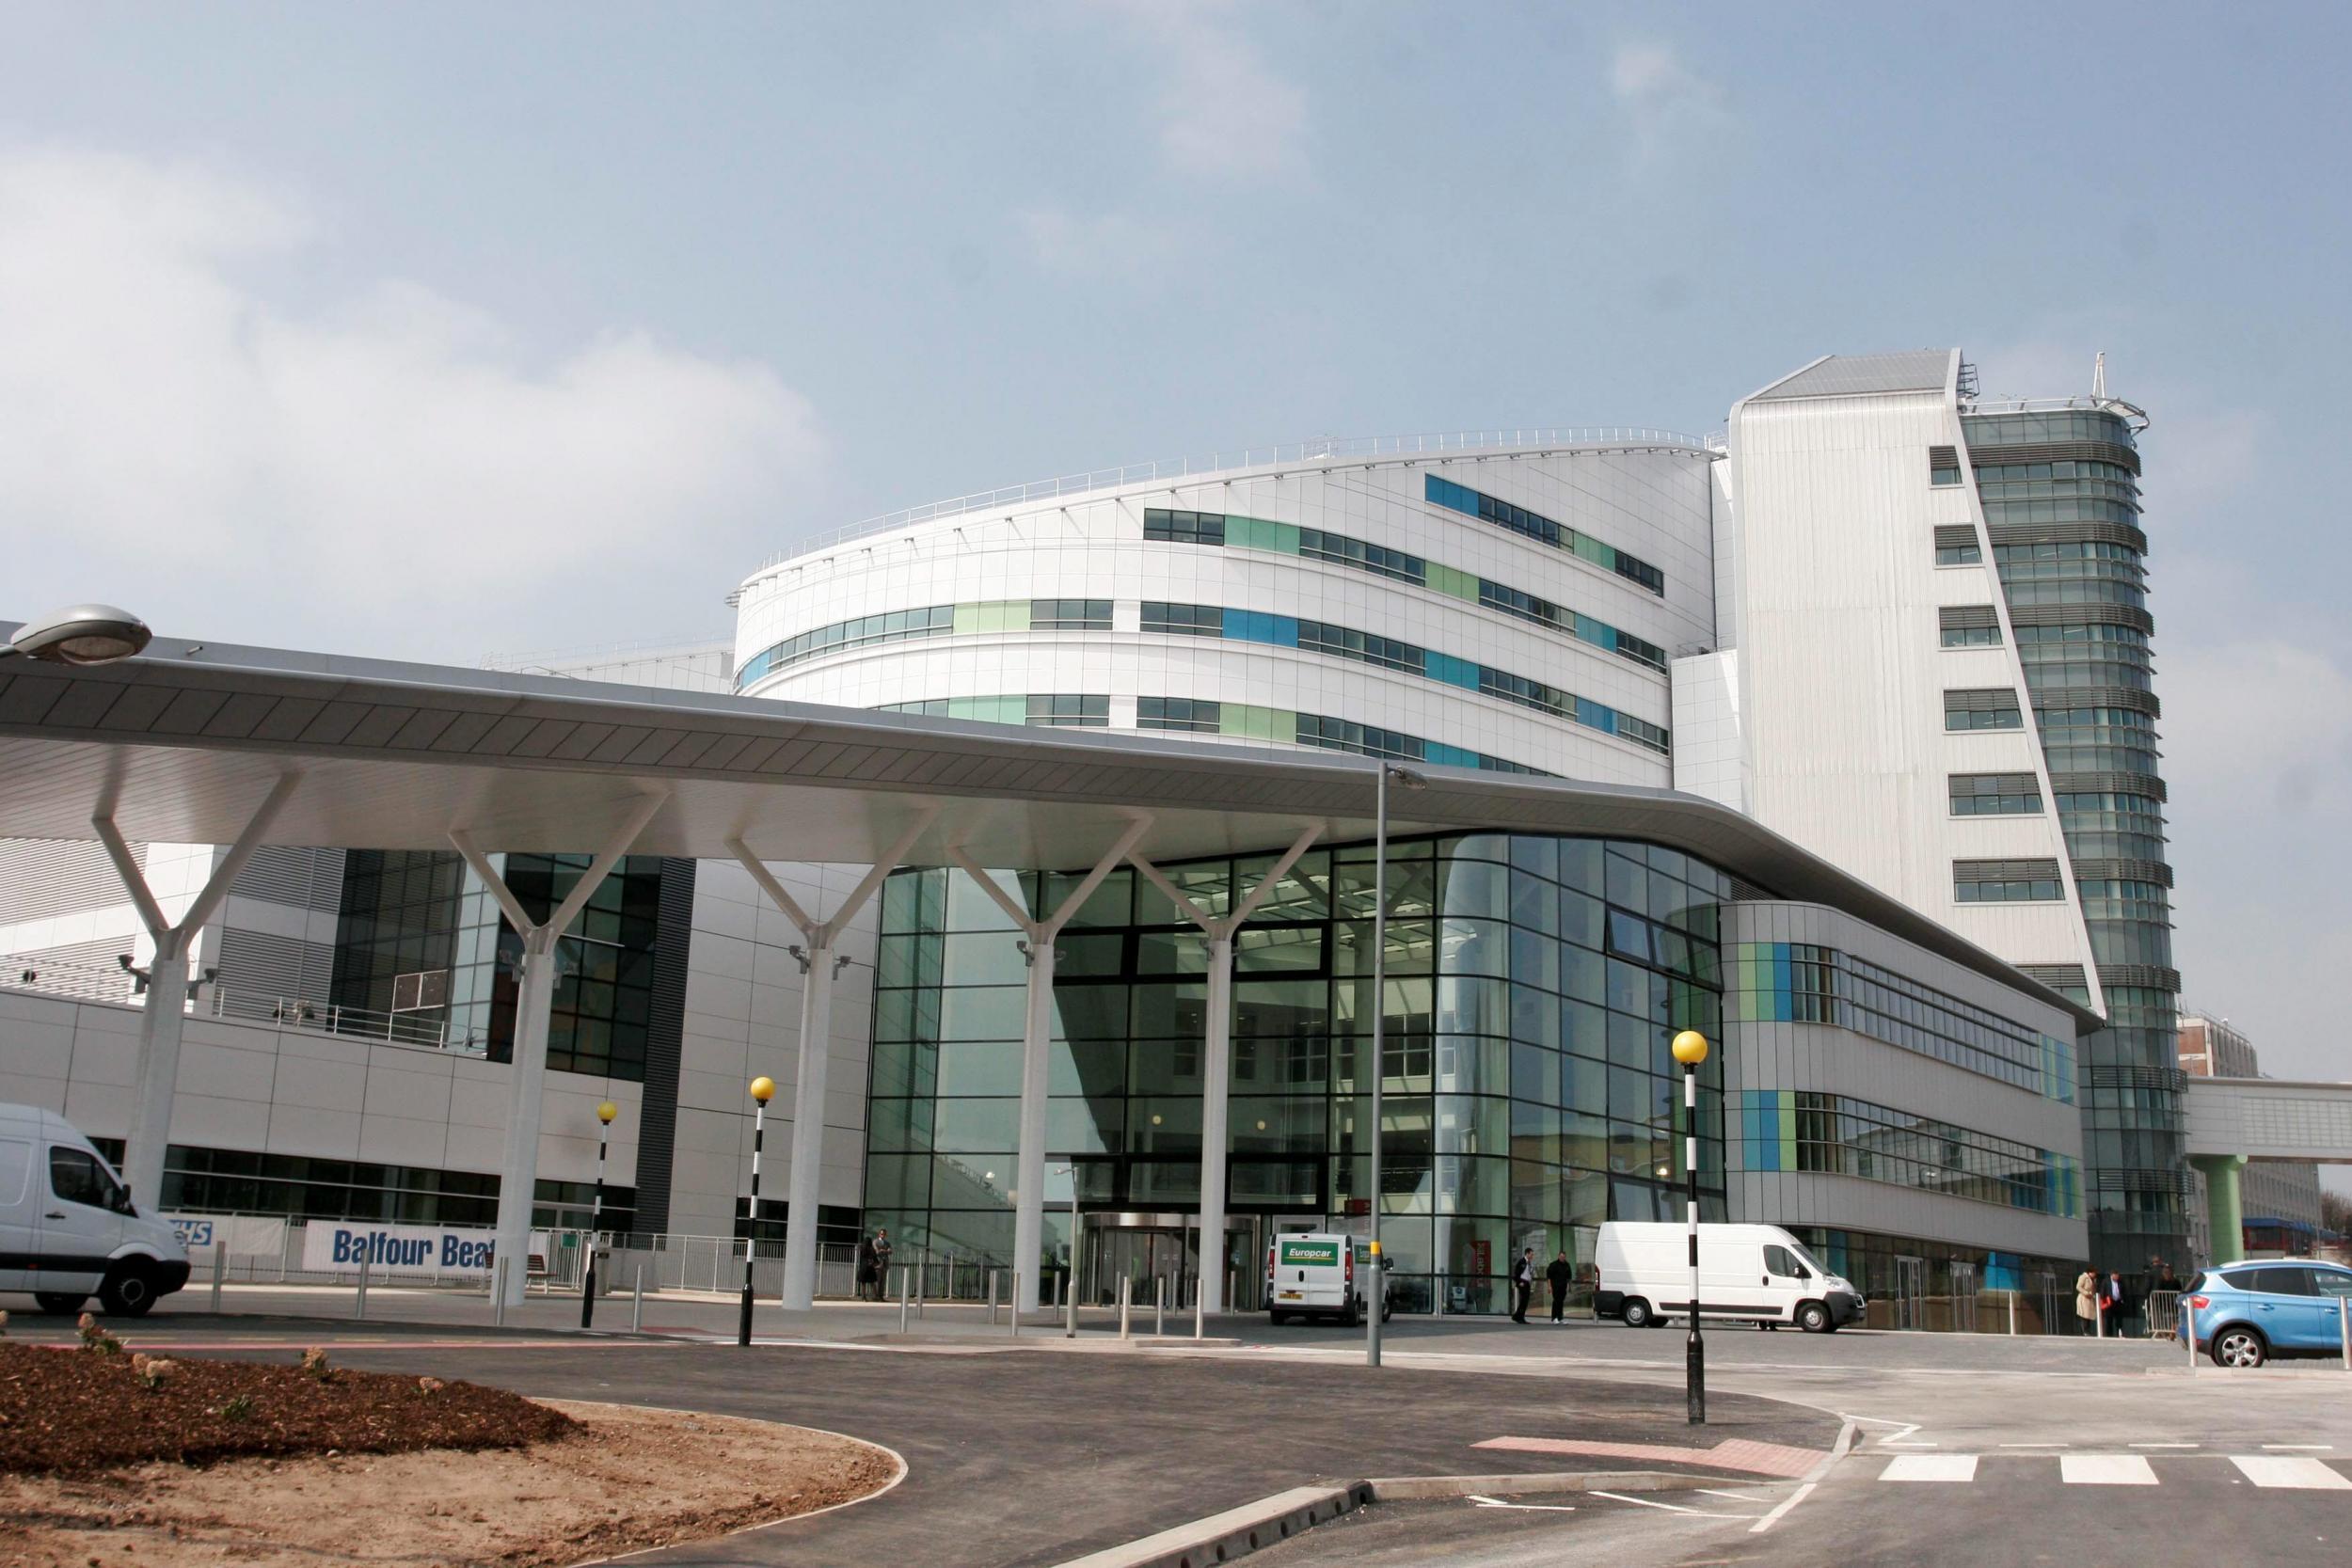 The incidents are believed to have happened when Bramhall worked at Queen Elizabeth Hospital in Birmingham, West Midlands